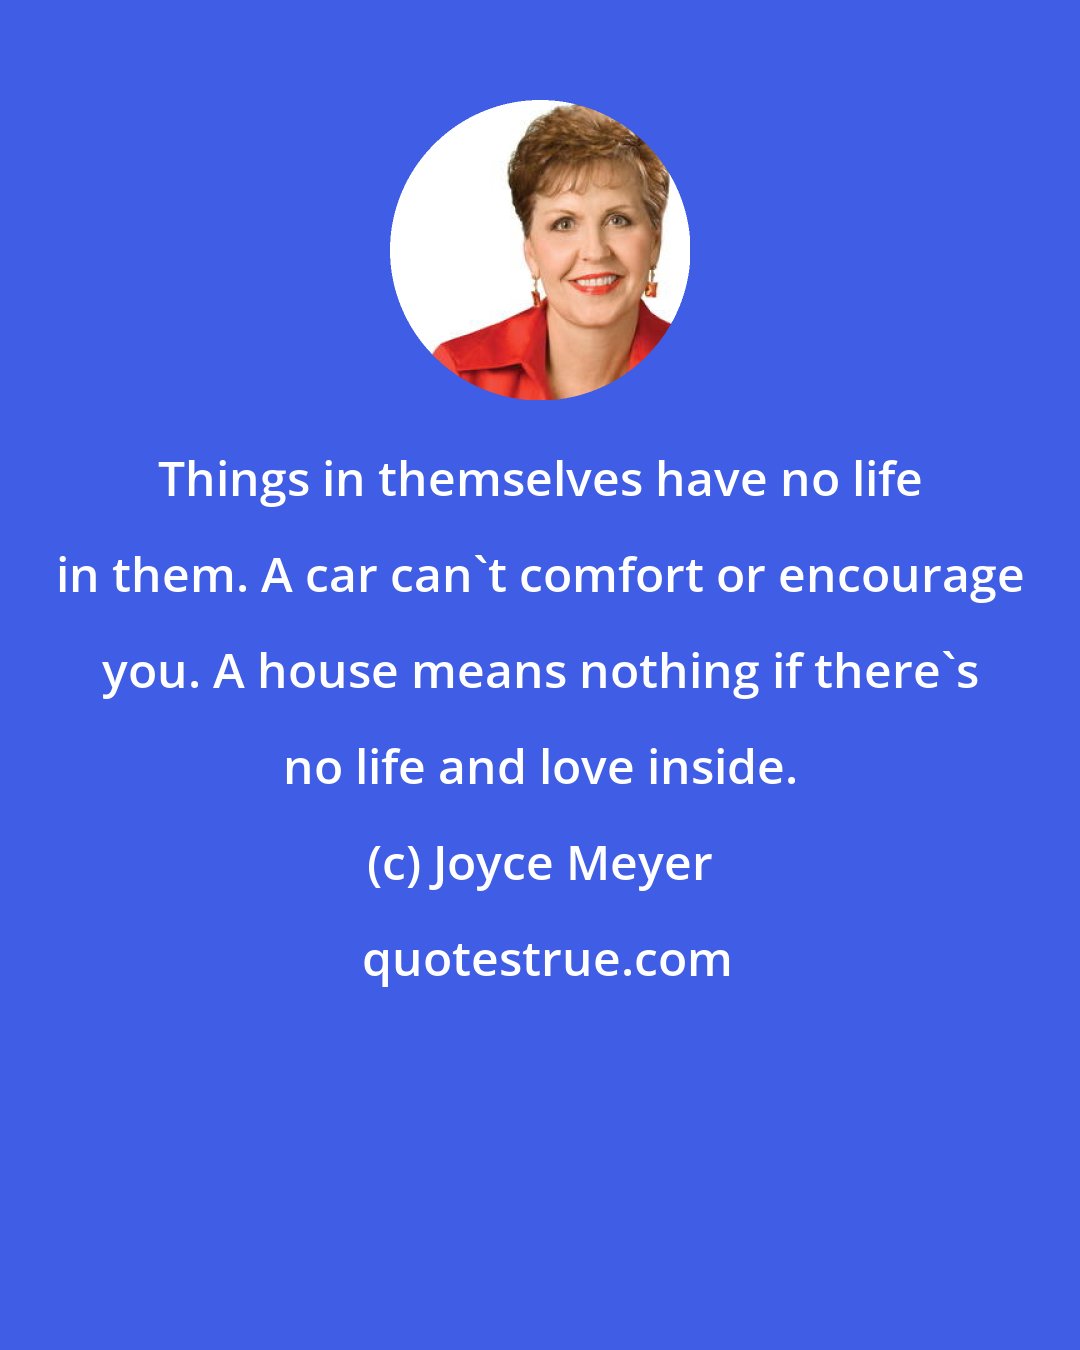 Joyce Meyer: Things in themselves have no life in them. A car can't comfort or encourage you. A house means nothing if there's no life and love inside.